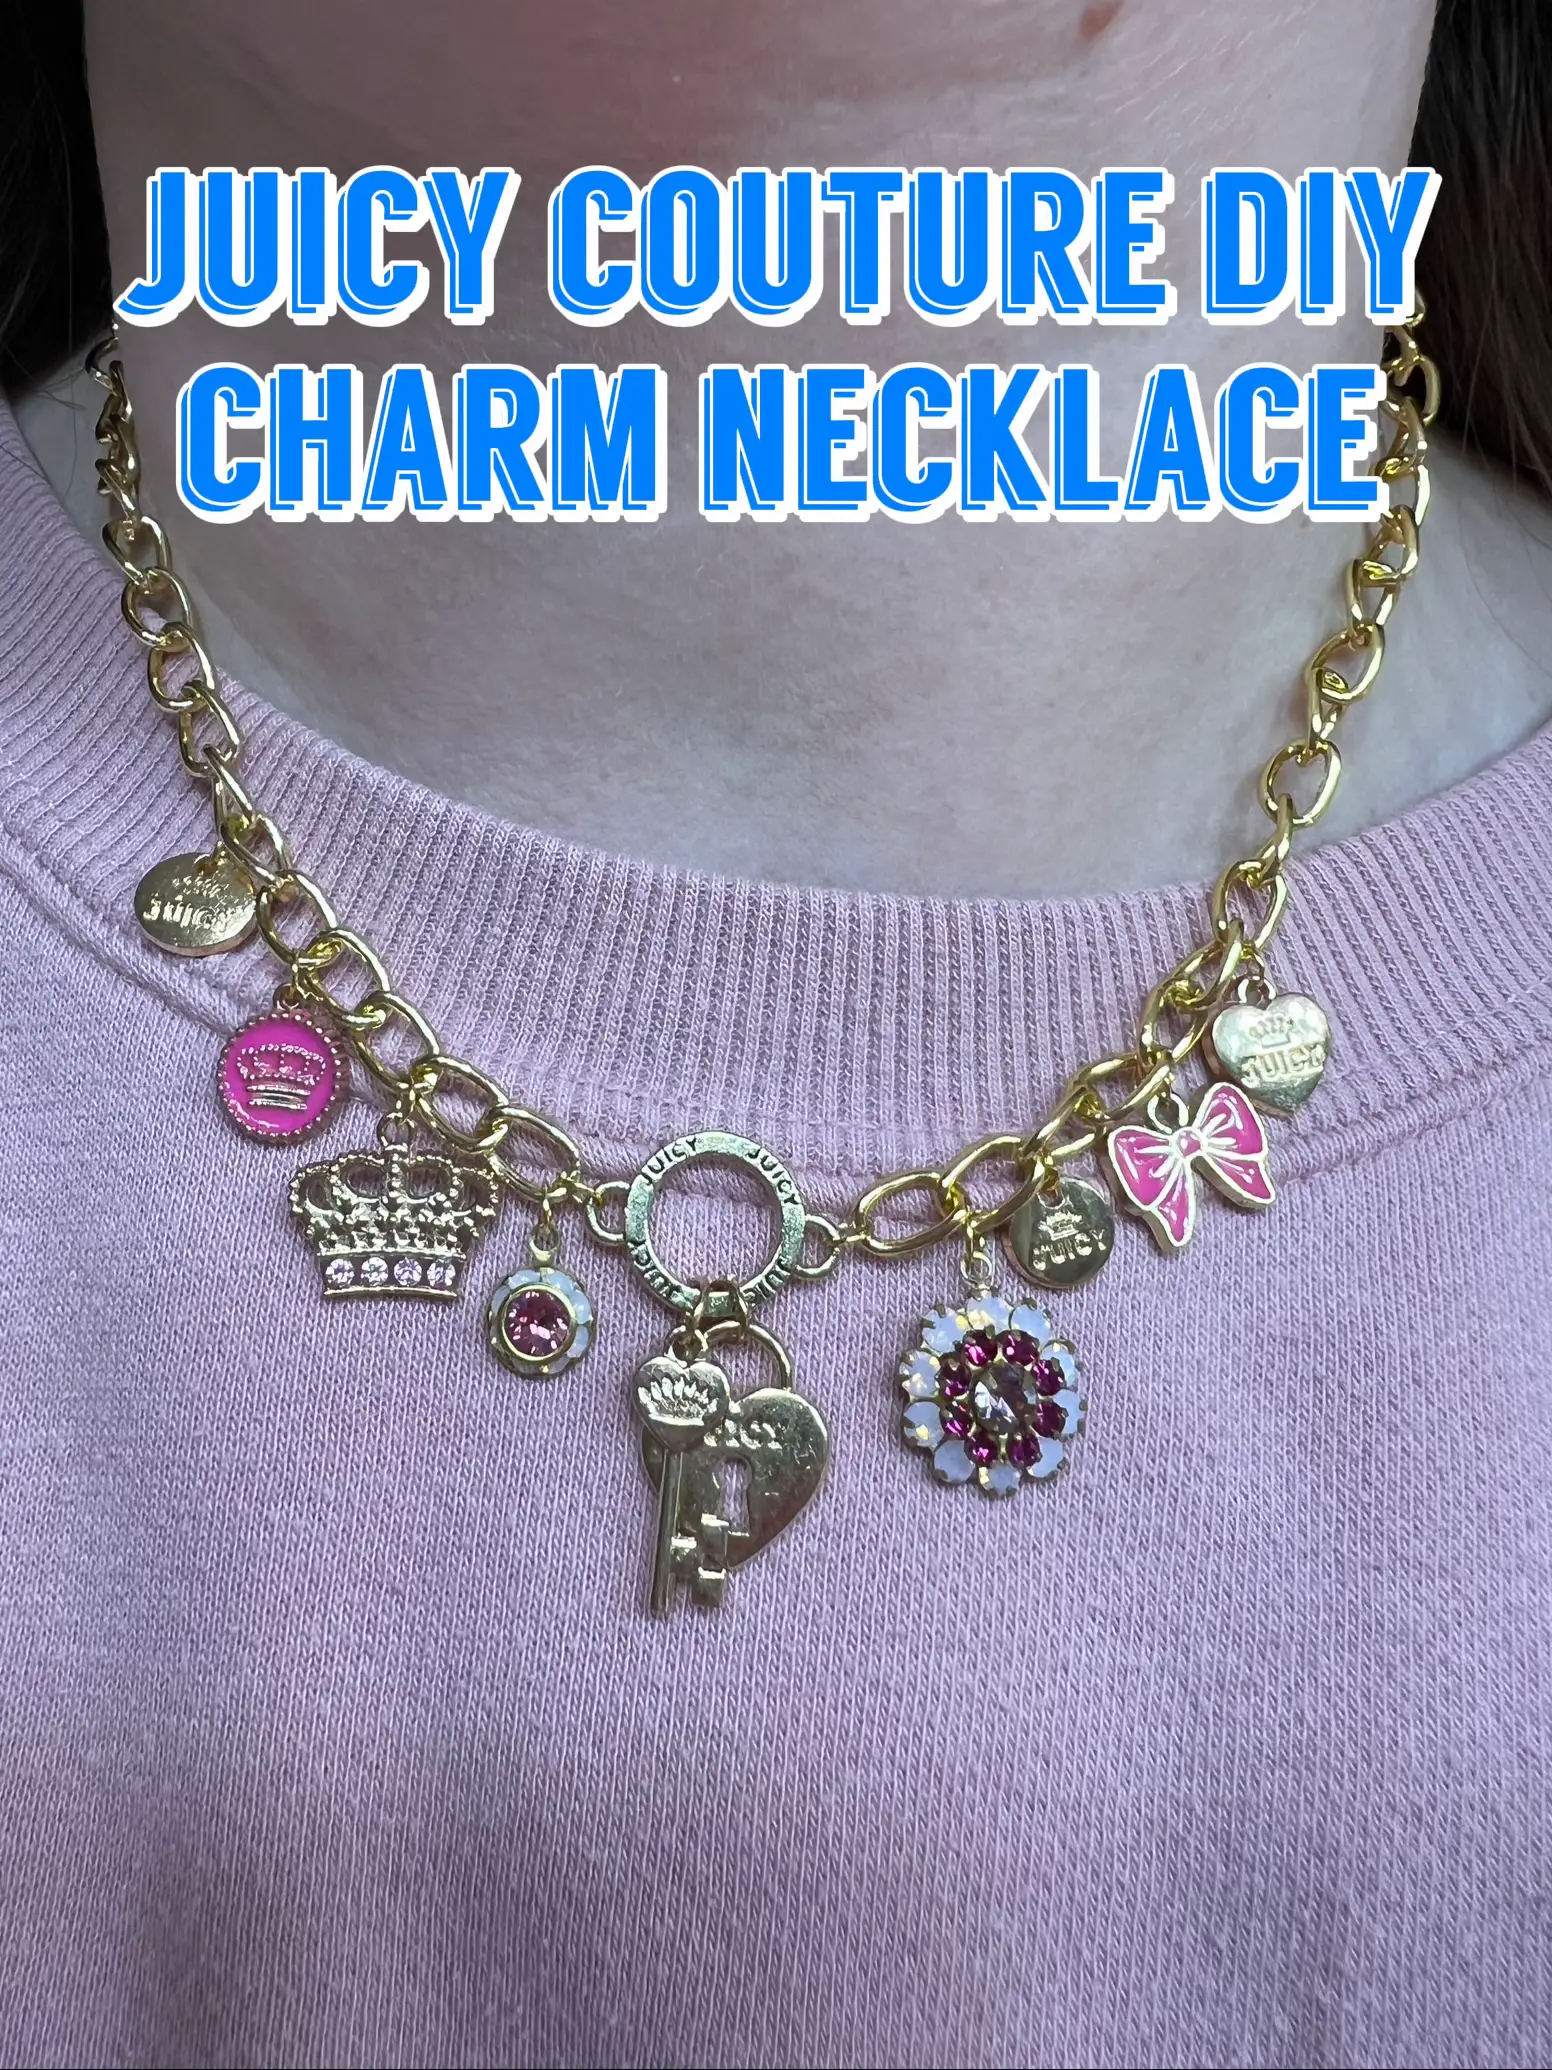 Juicy couture DIY charm necklace, Gallery posted by Tori